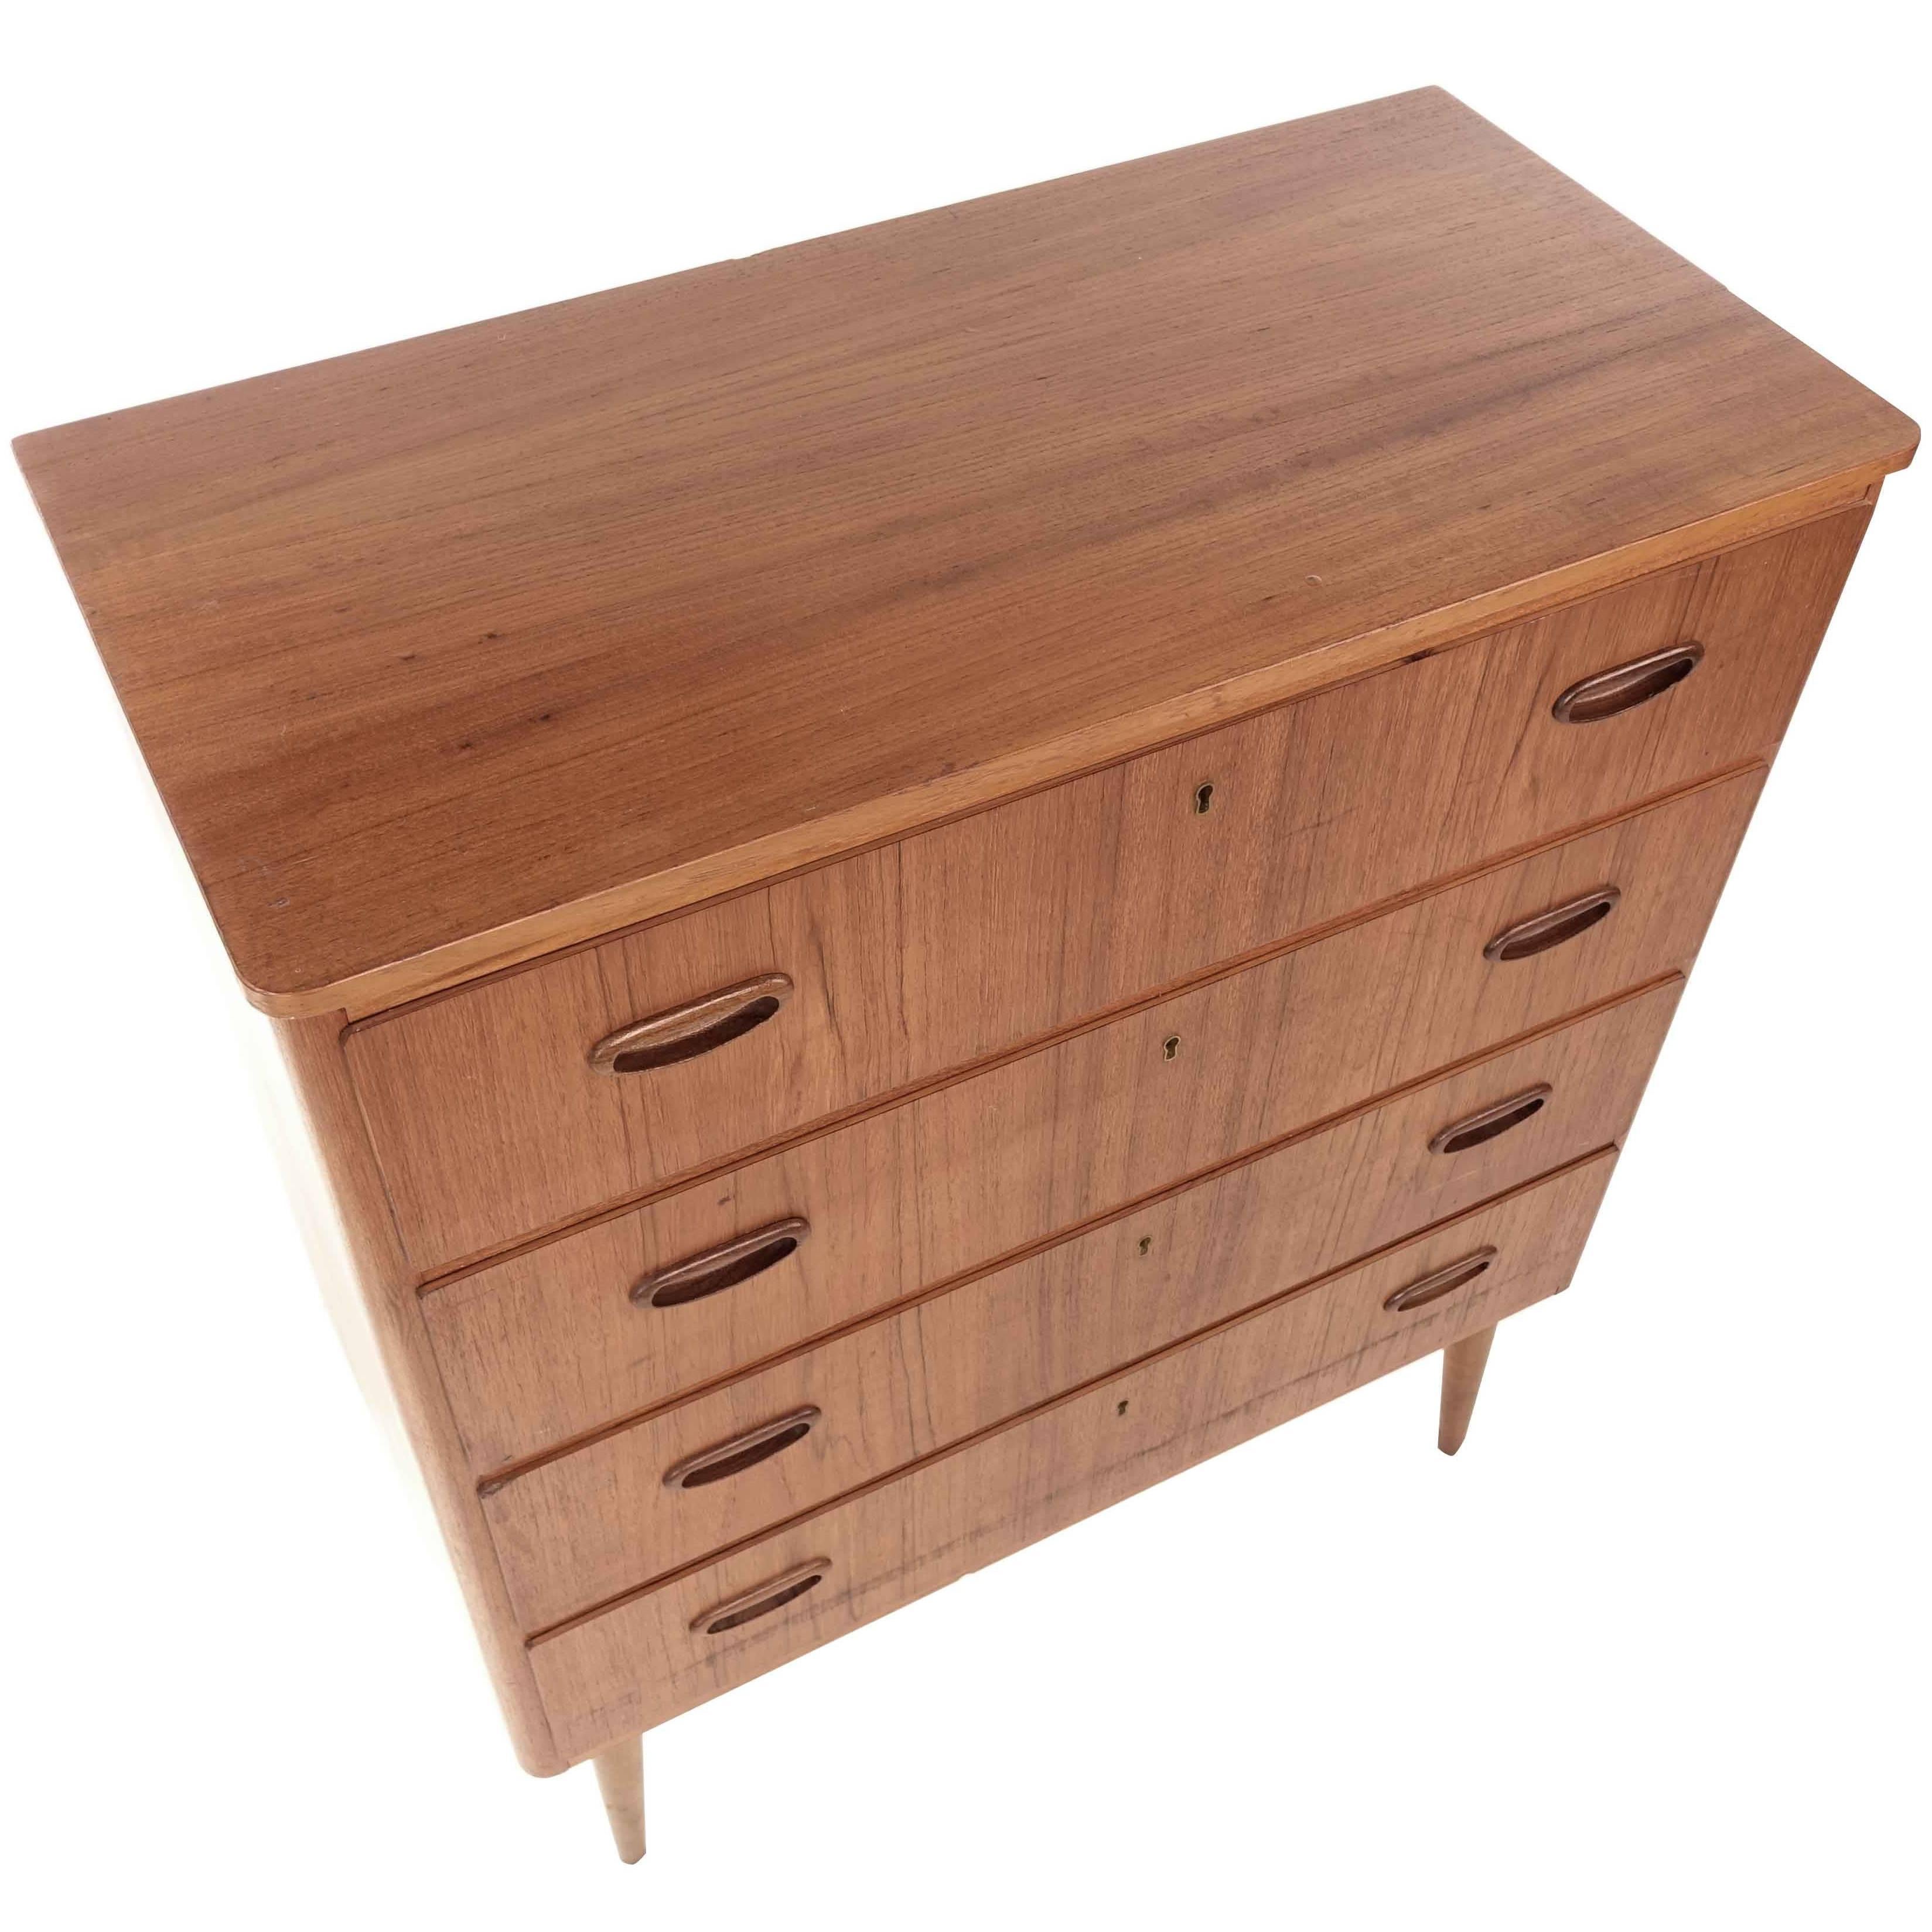 Swedish Teak Chest of drawers from 1950s